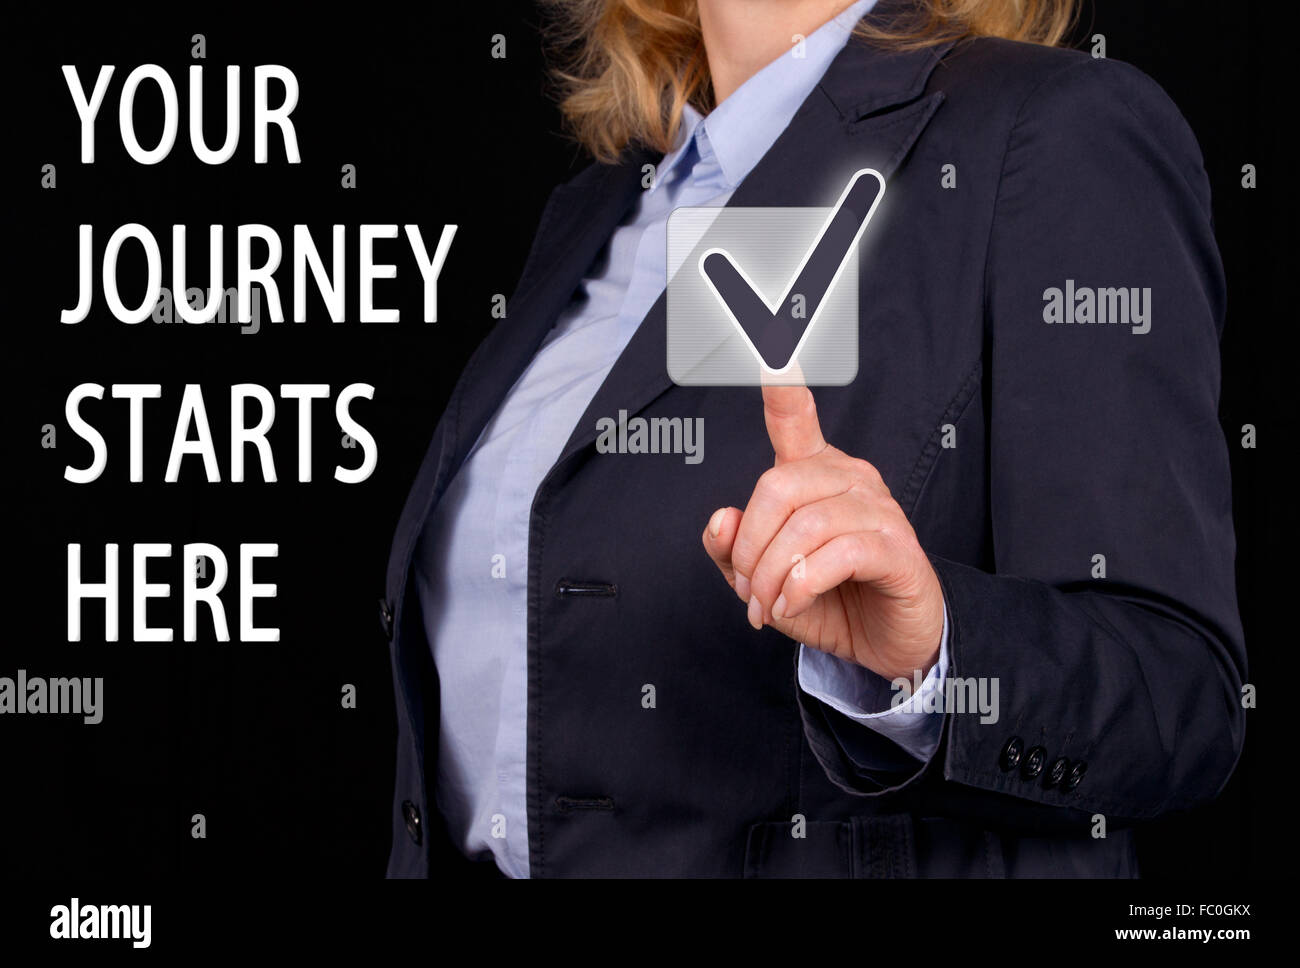 Start your journey. The Journey starts here. Speak up комплаенс культура. Start here. What is success.